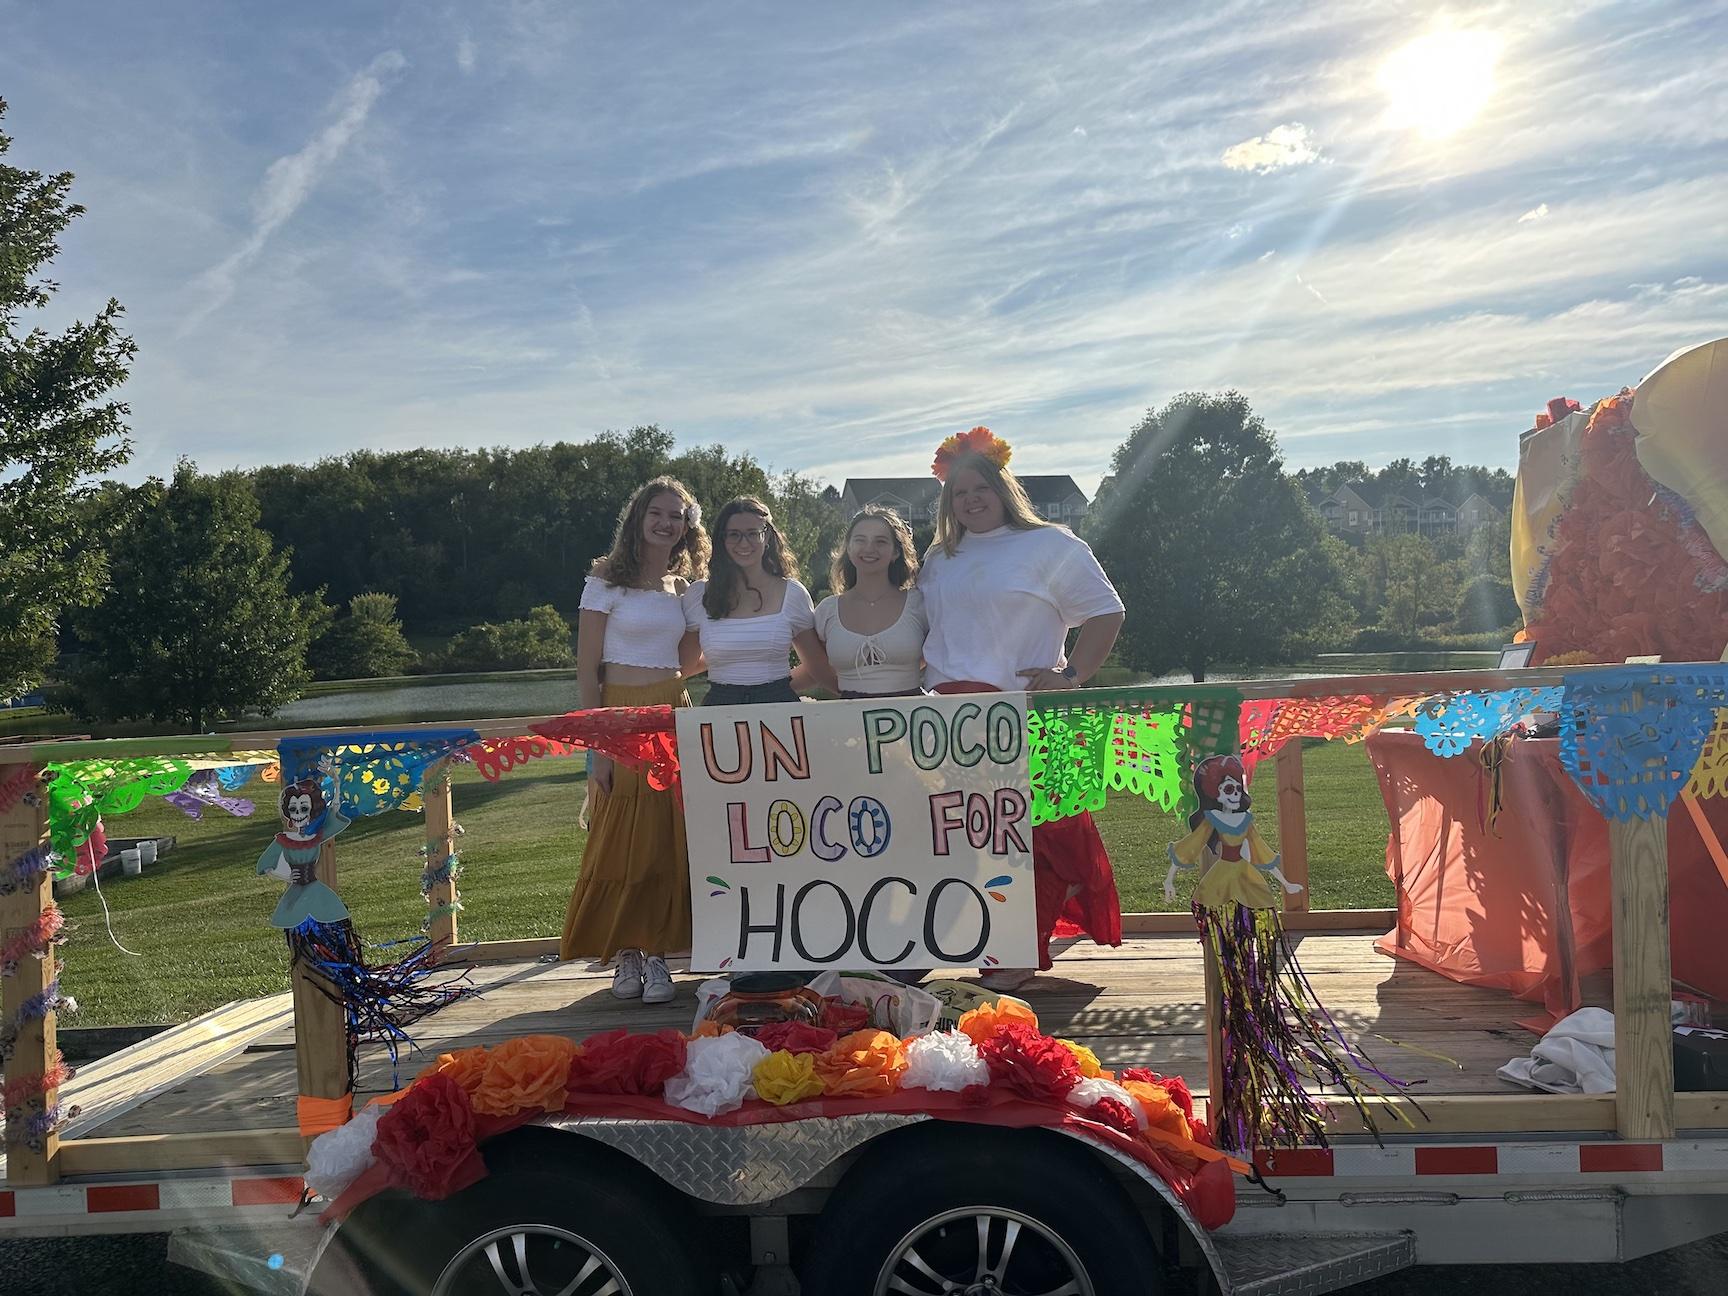 Spanish Club members pose on their ‘Most Creative’ prizewinning float